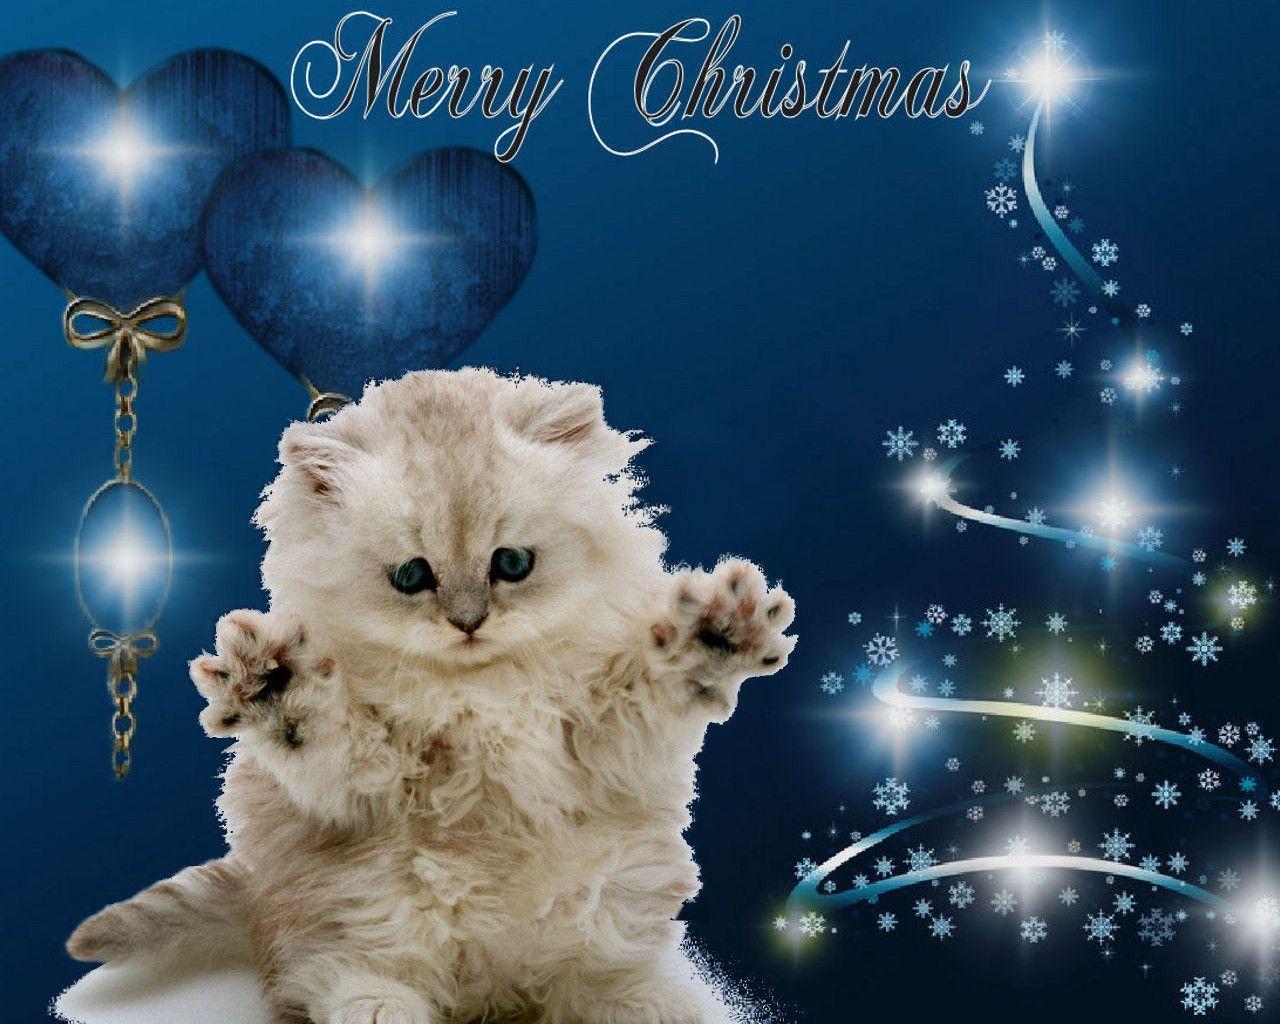 merry christmas from a lonely kitten